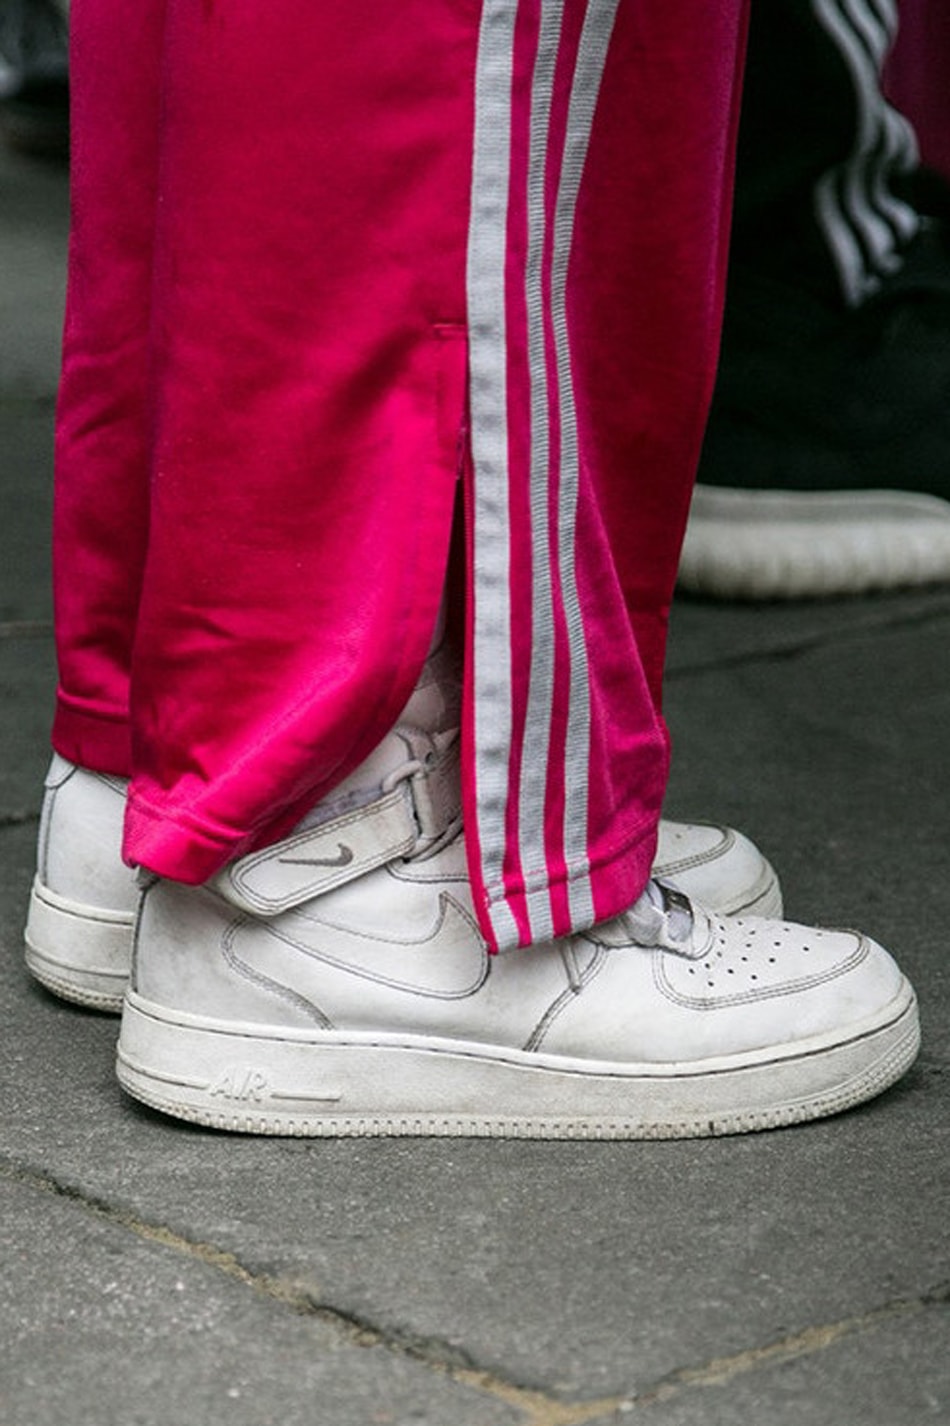 Nike Air Force 1 Low White adidas Track Pants Pink